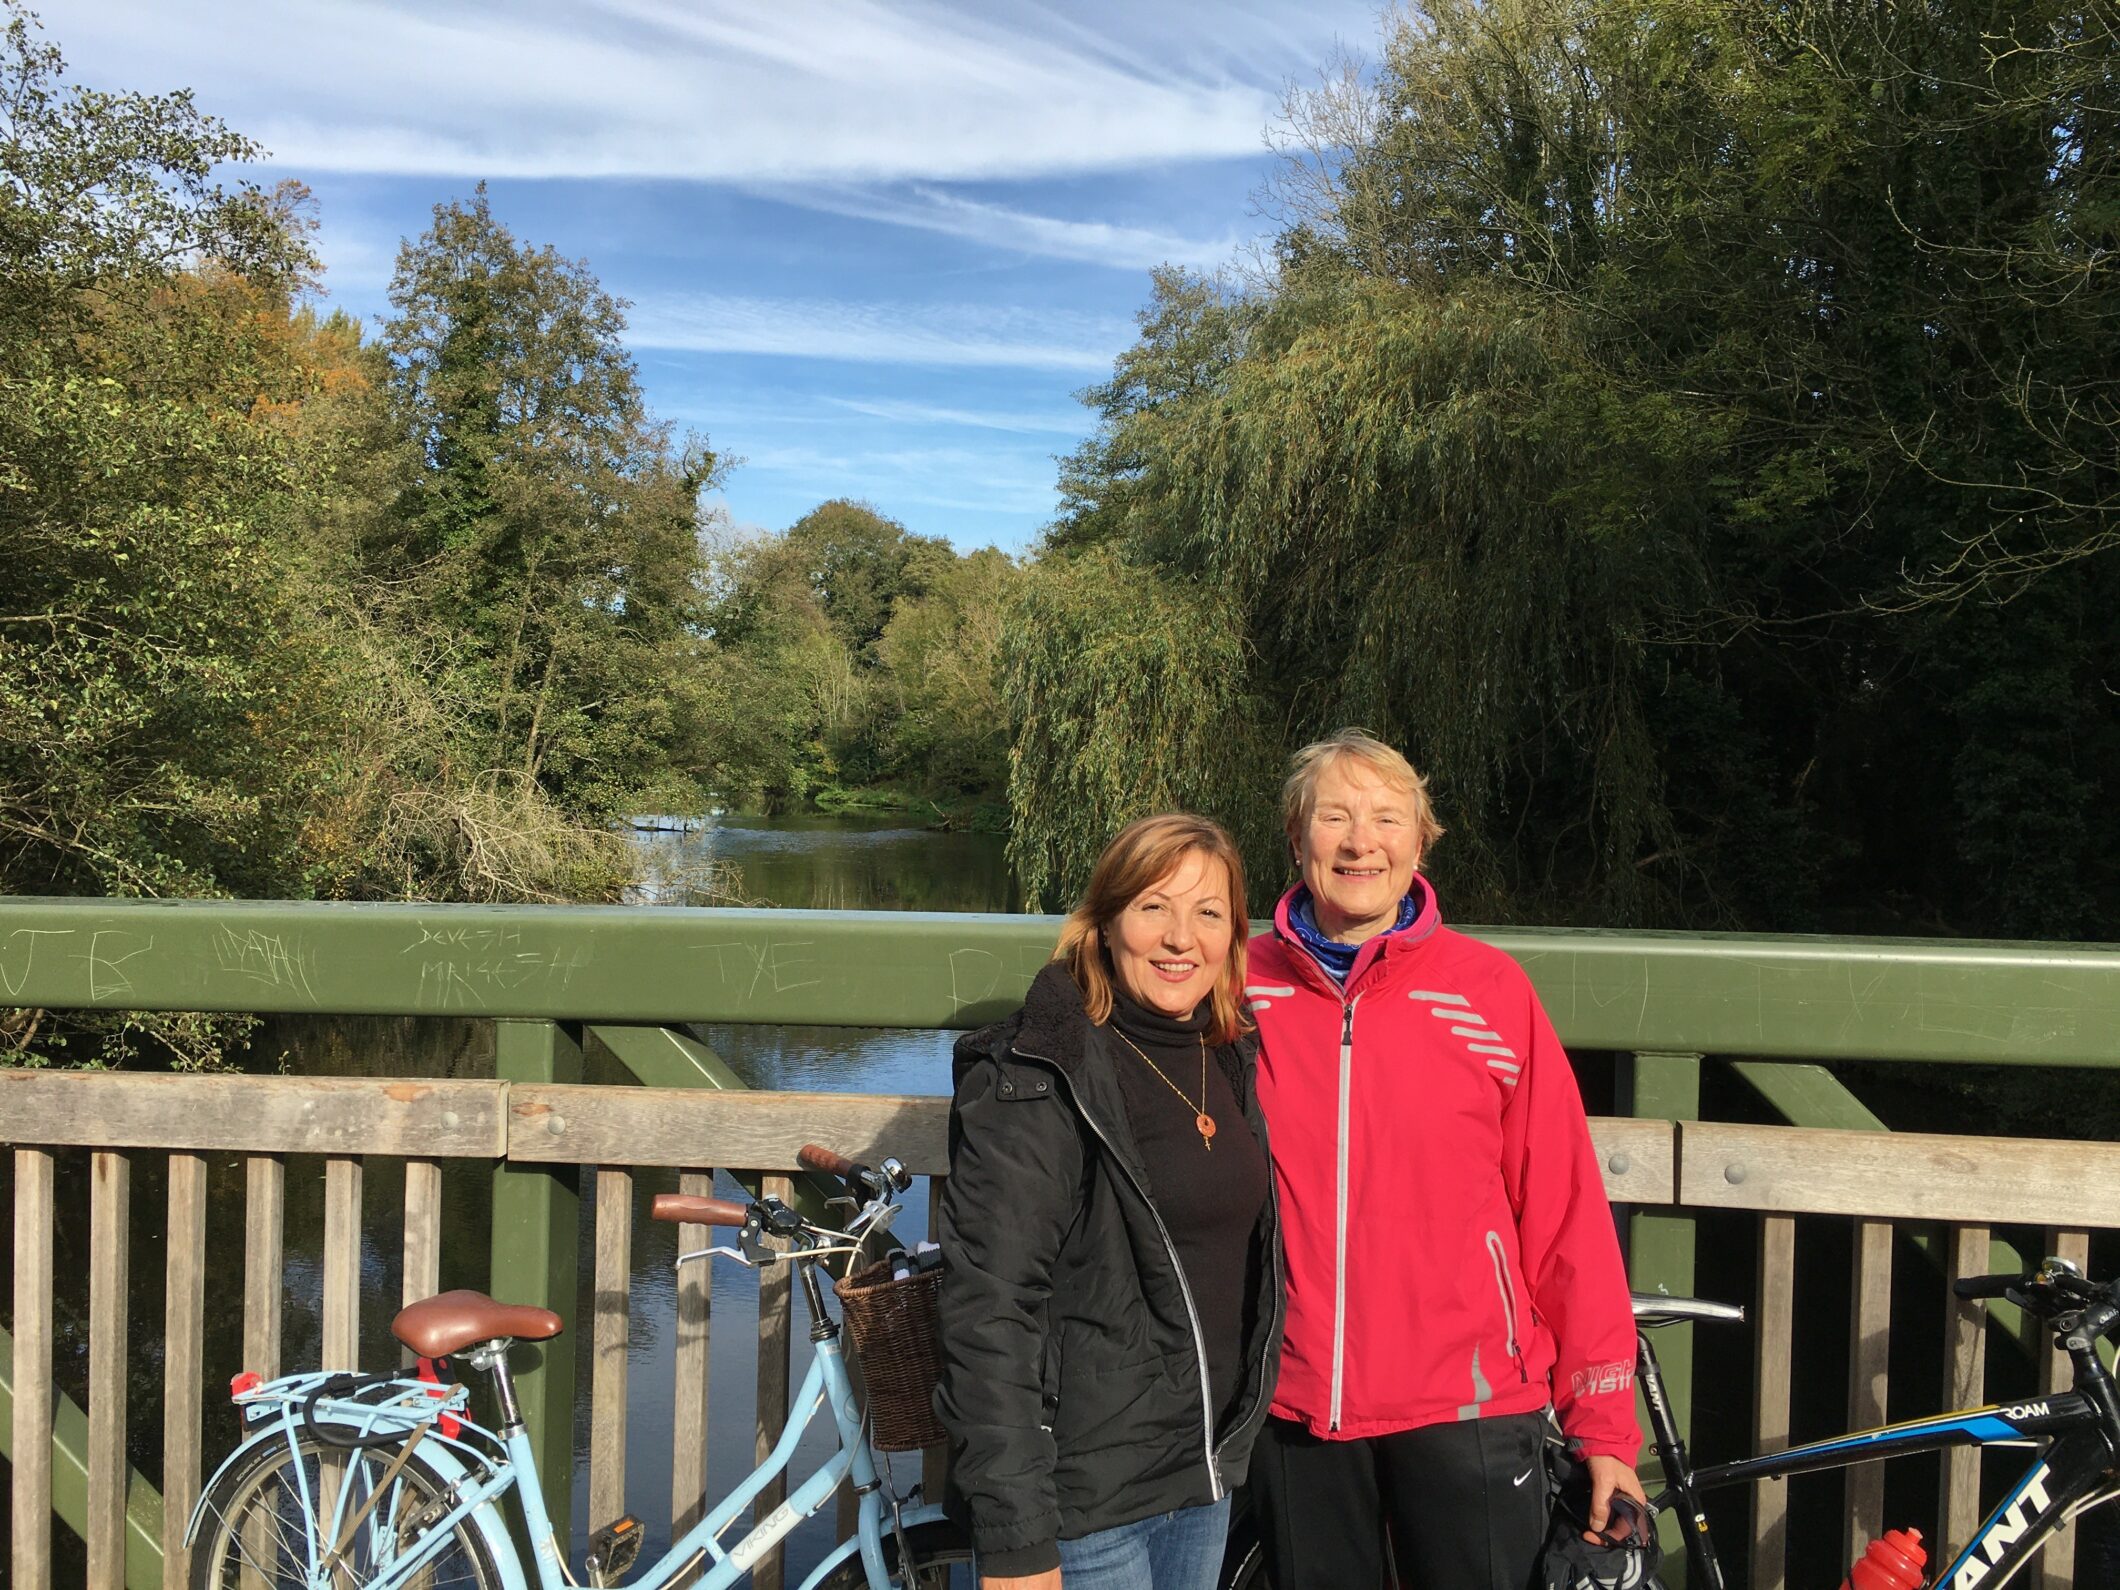 Two women standing next to each other on a bridge smiling at the camera, with their bikes on a bridge